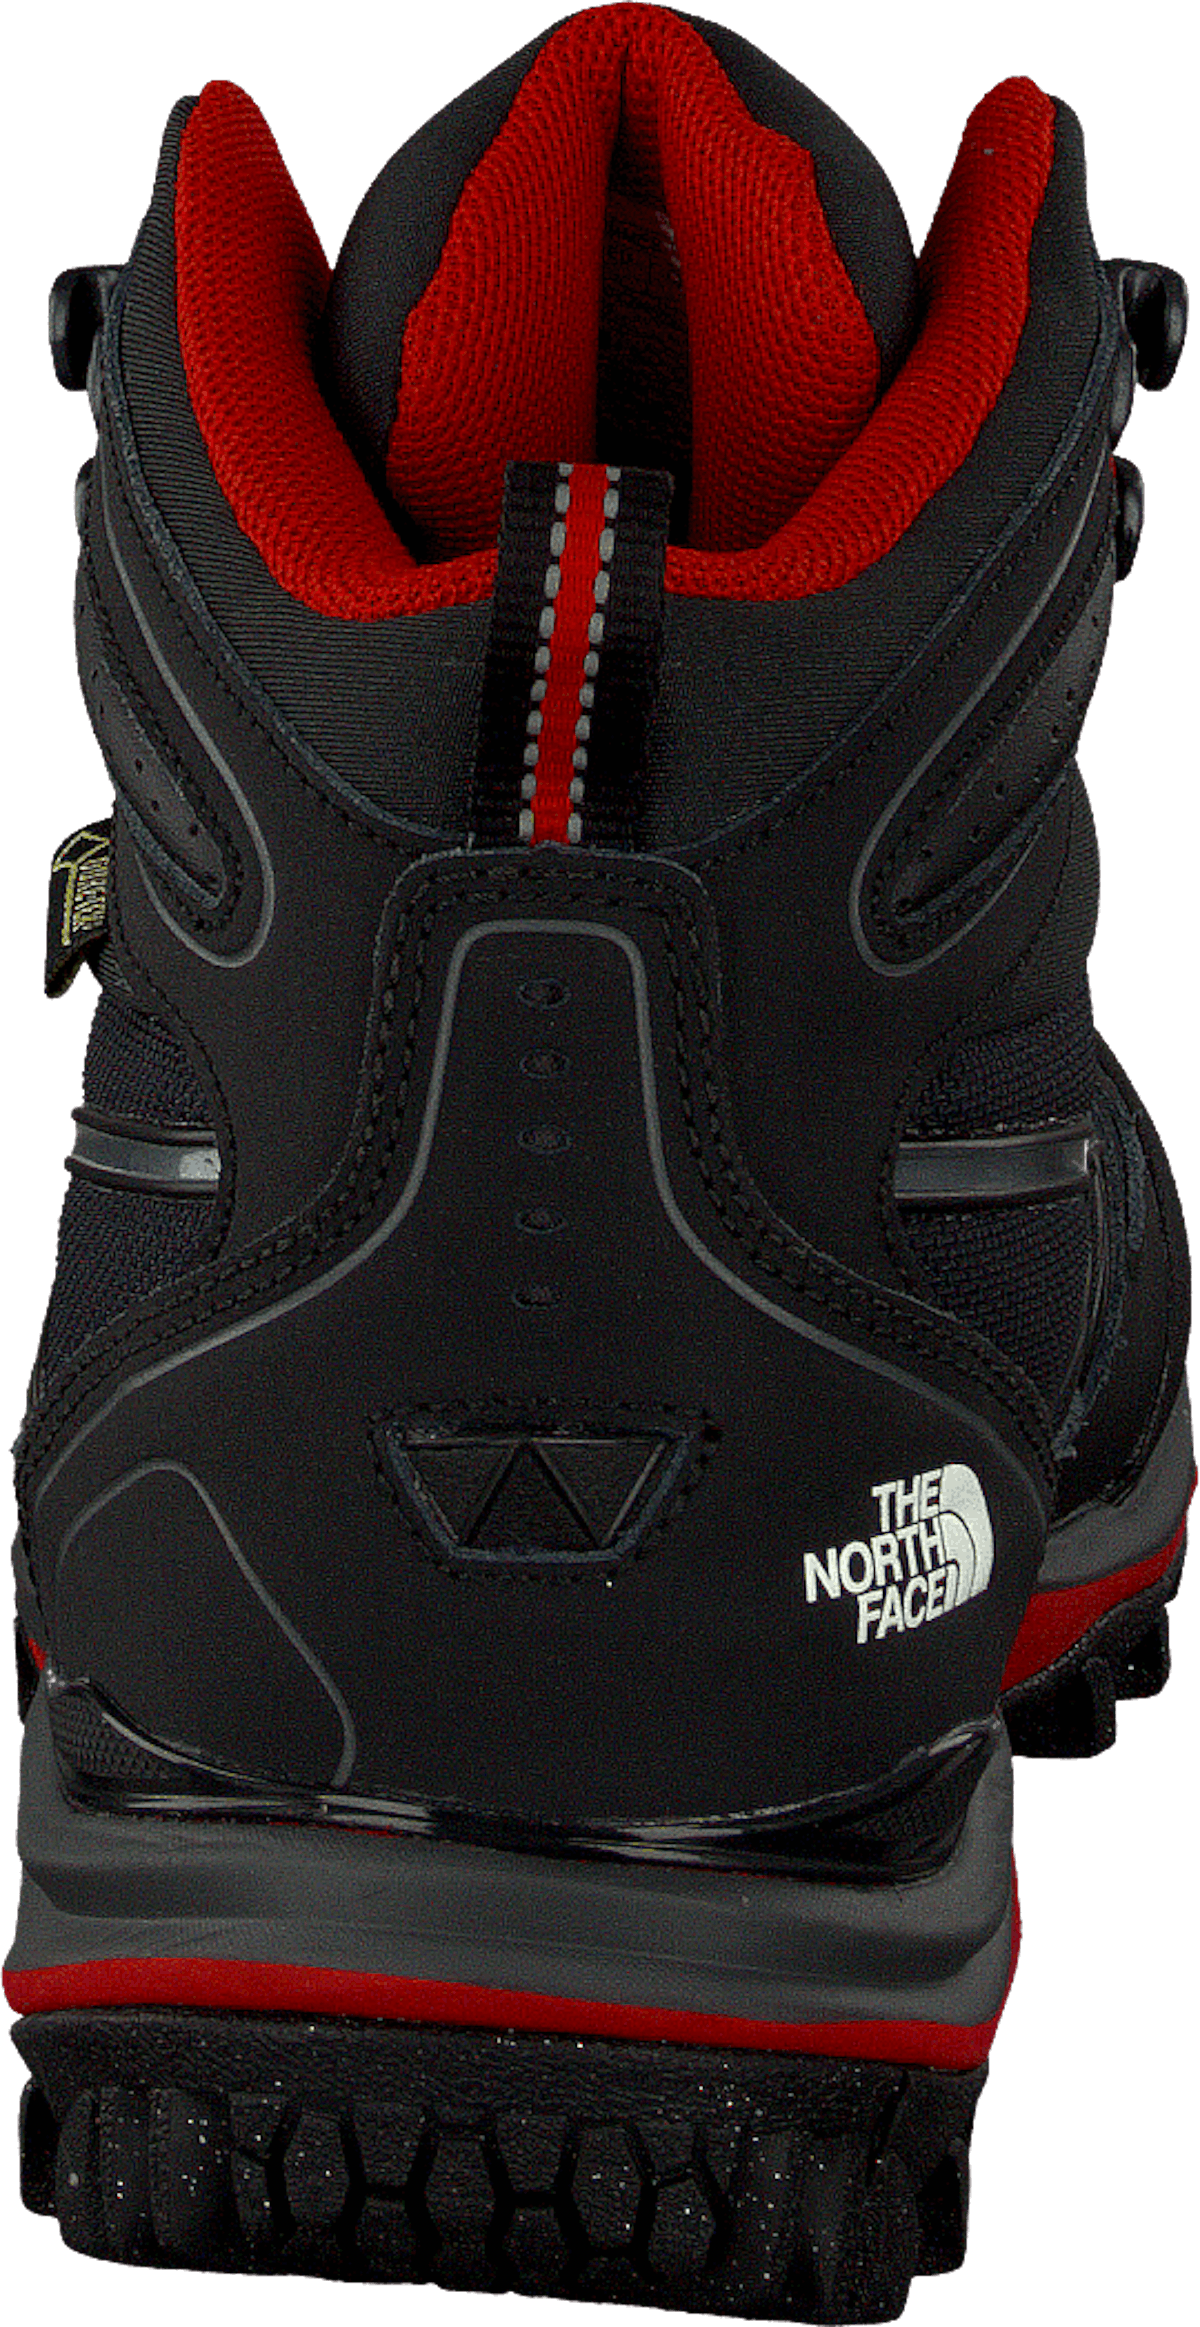 Ultra Extreme Tnf Blk/Tnf Red